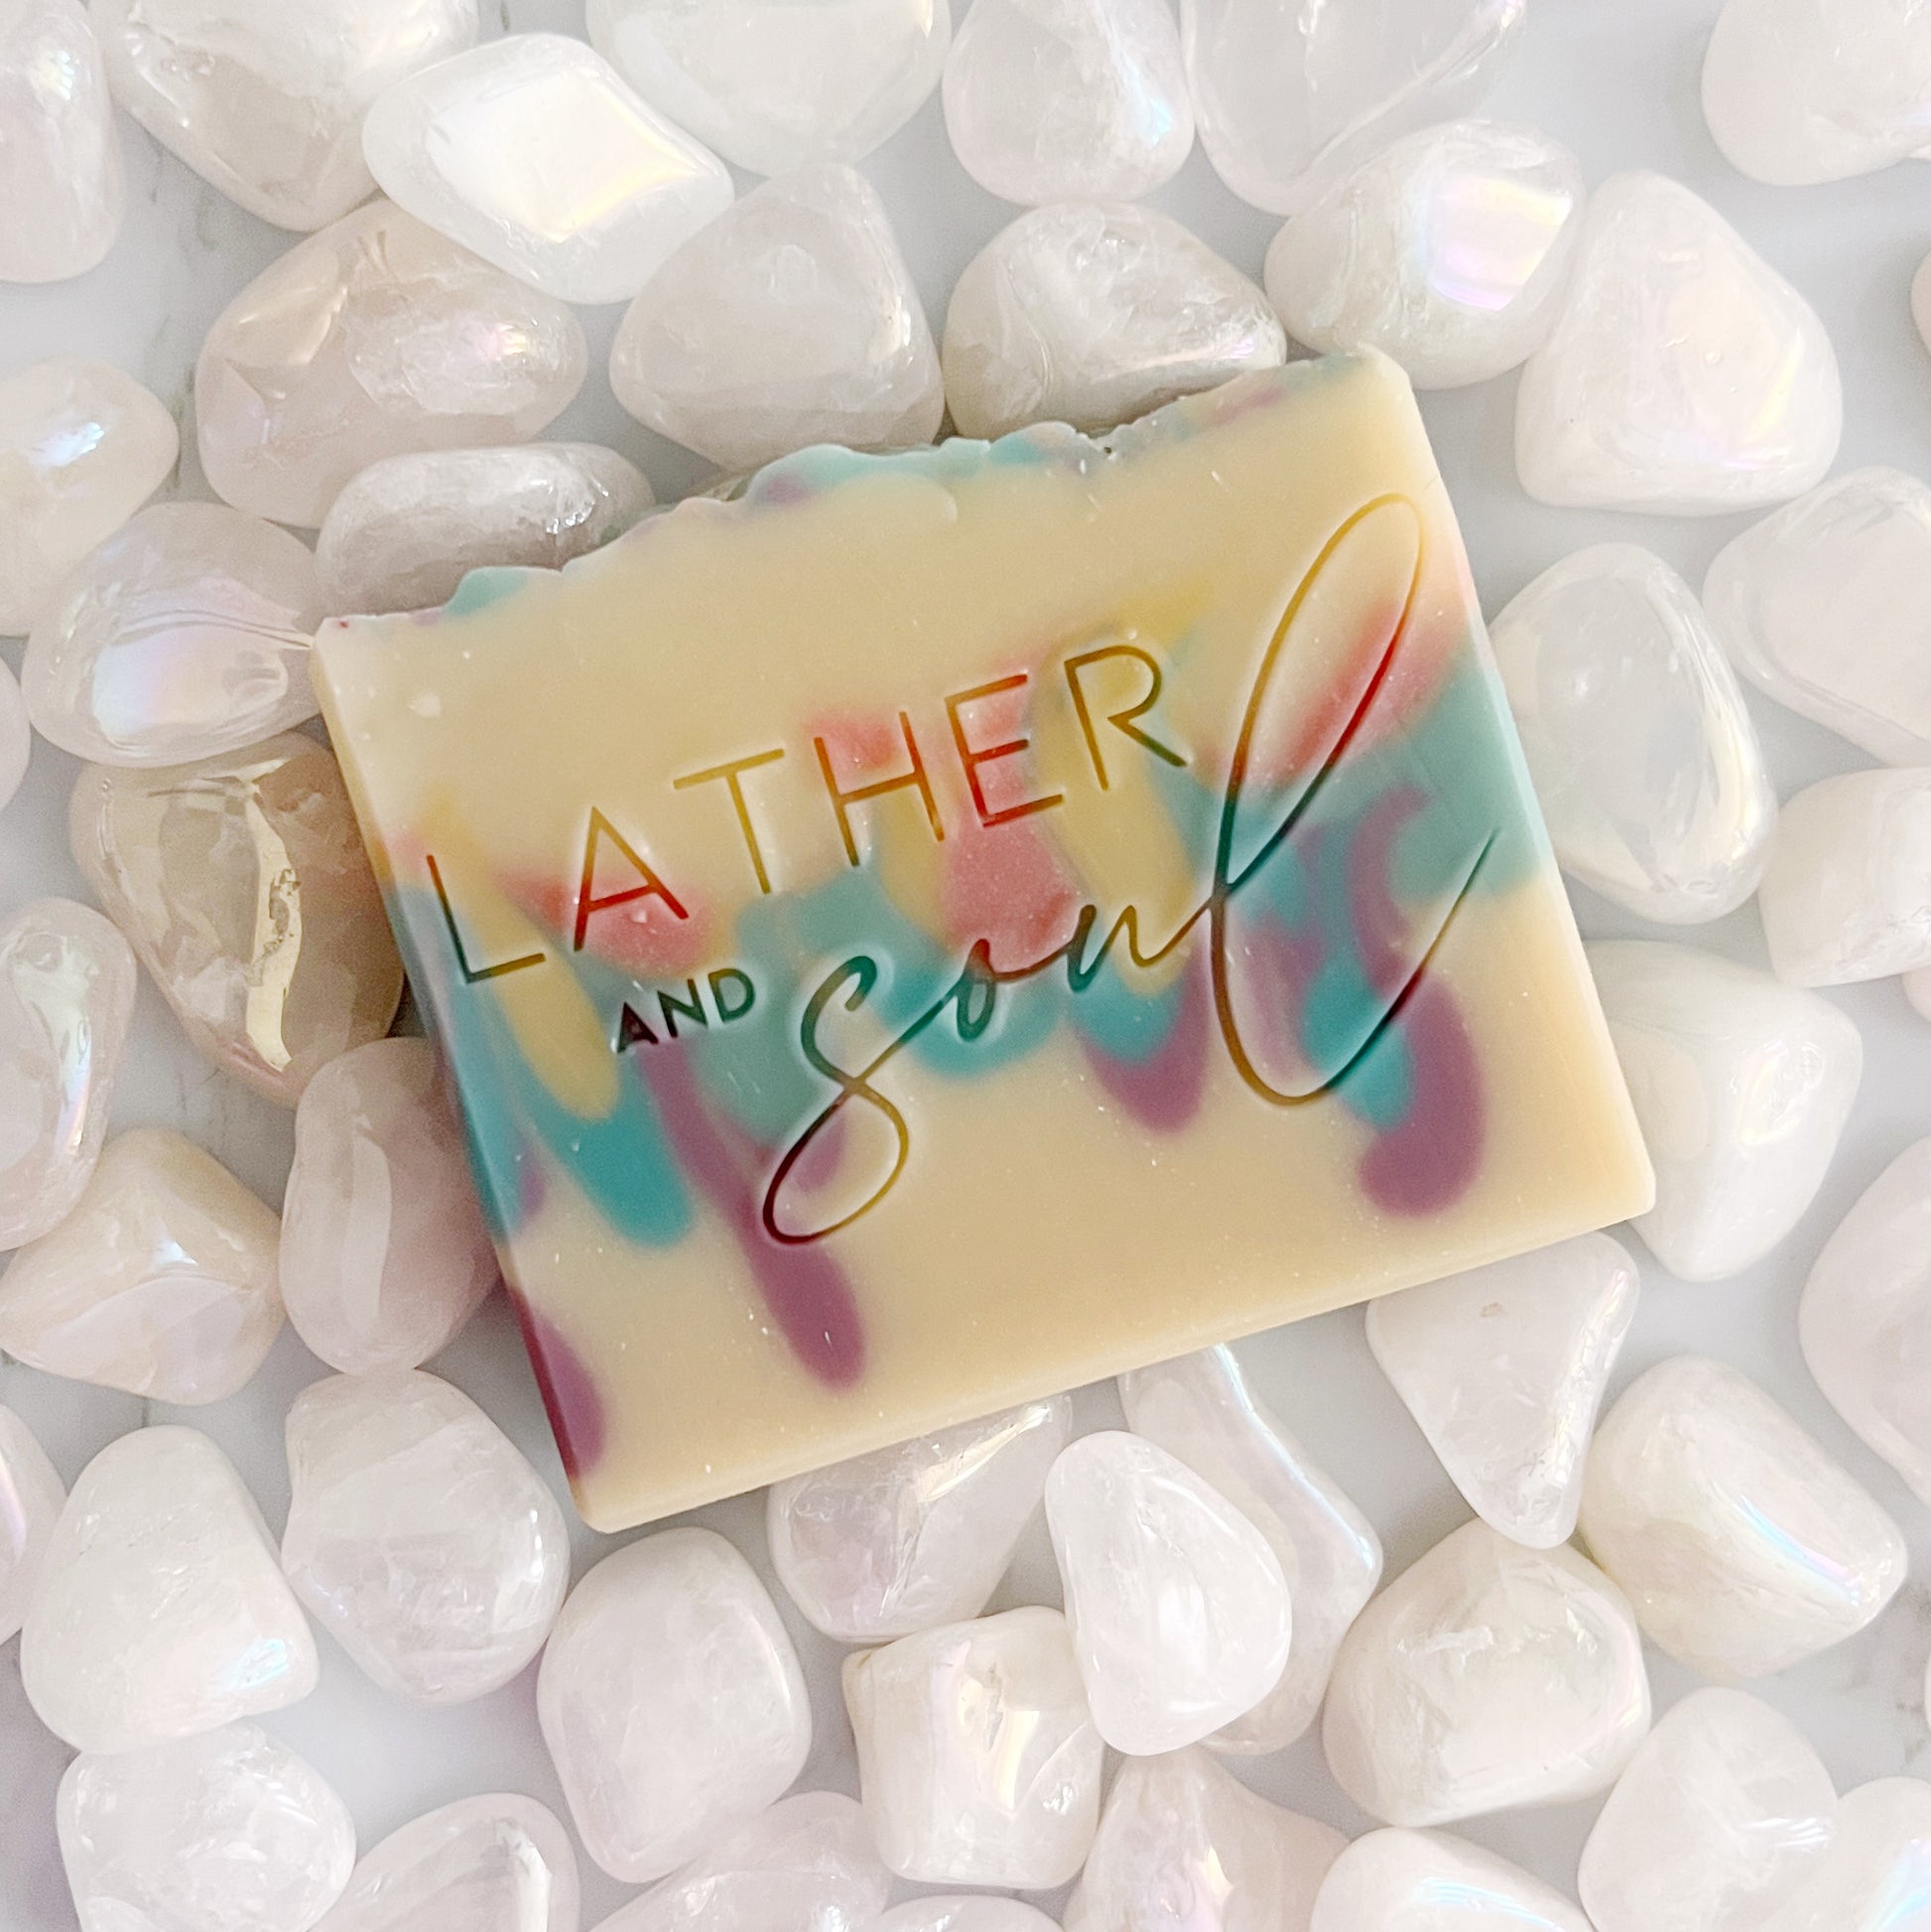 Crystal soap with angel aura rose quartz from Lather and Soul